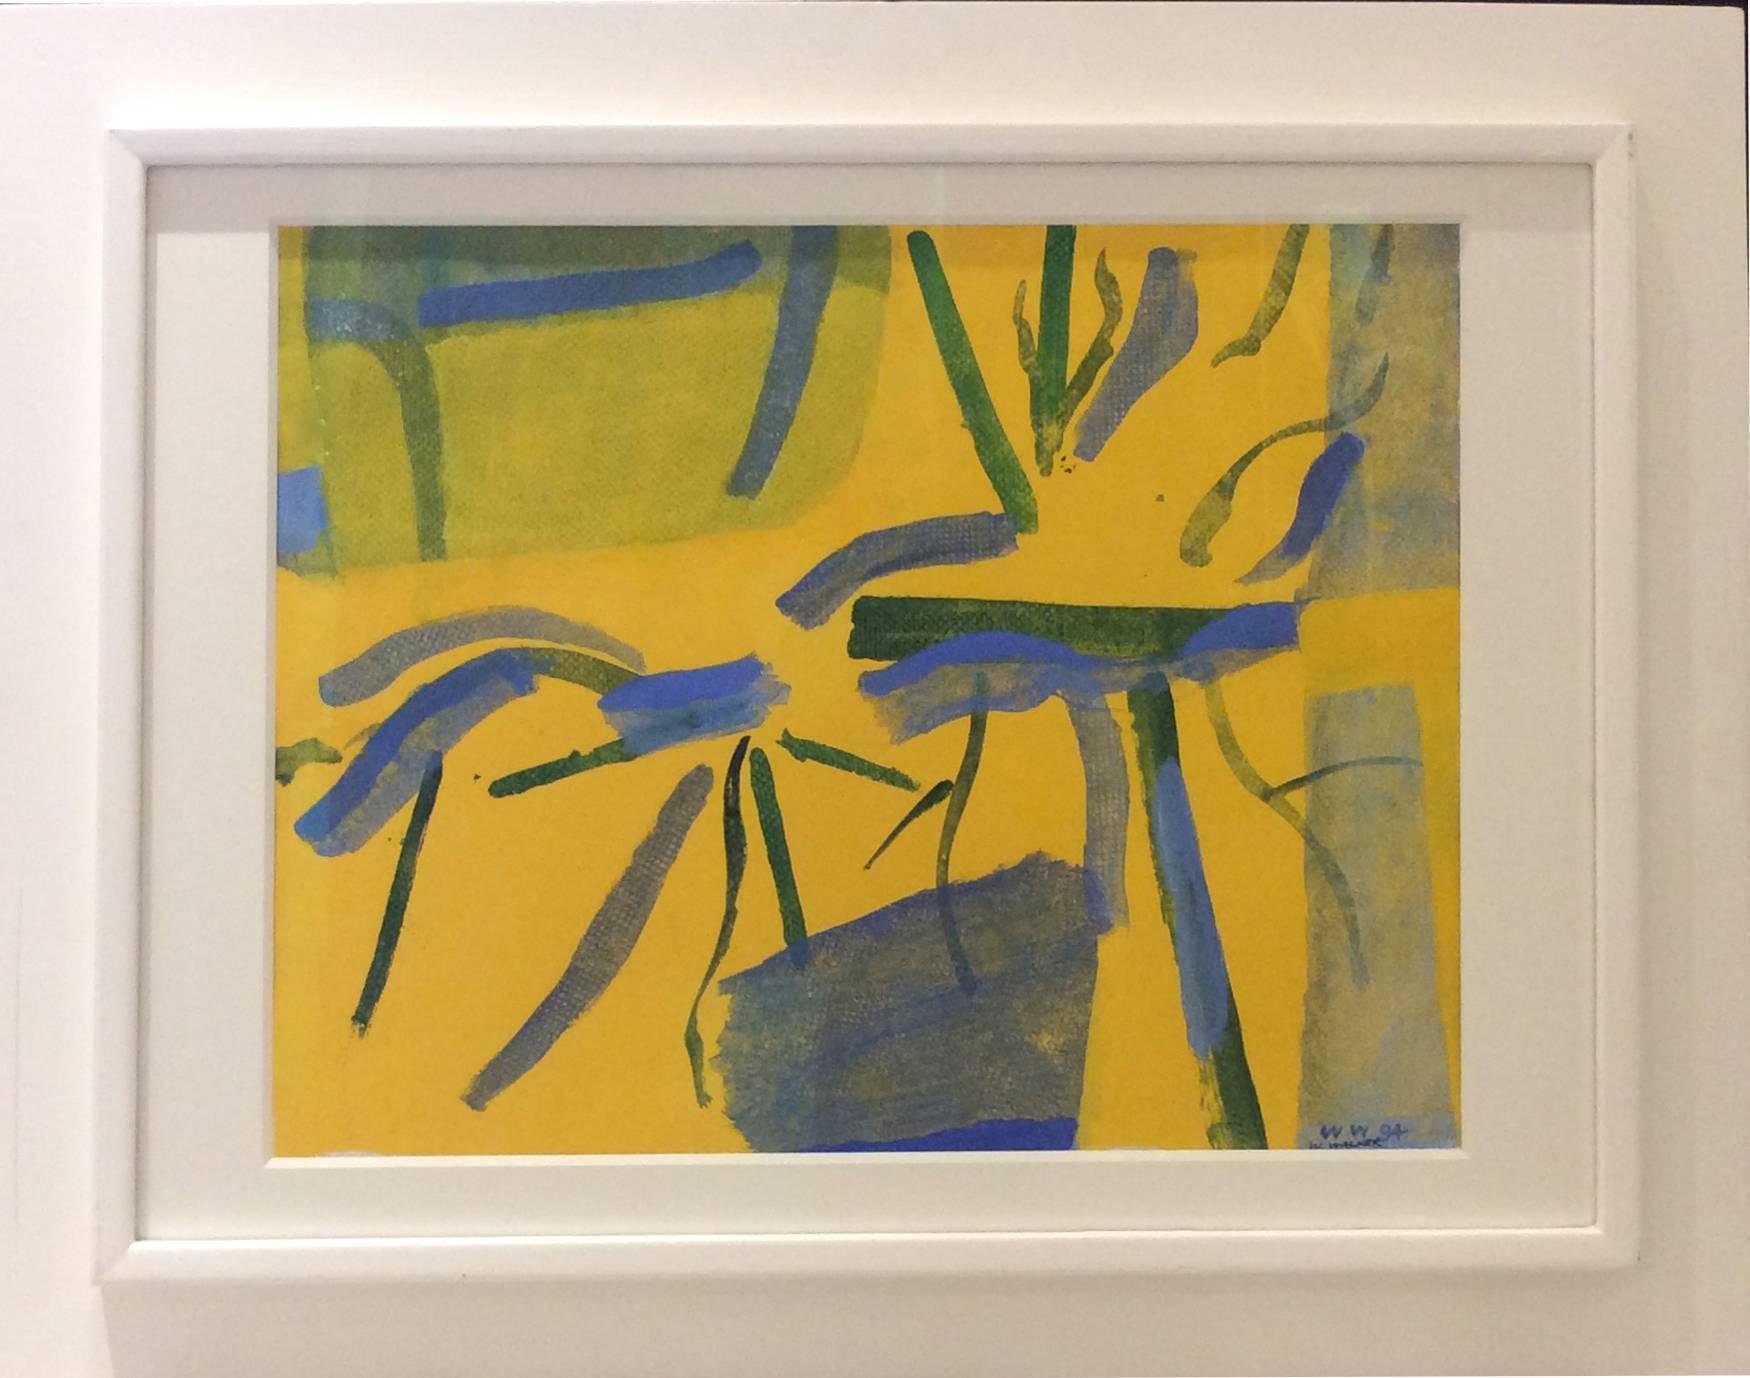 acrylic on paper, yellow and blue contemporary abstract painting on paper
image - 15 x 19.5 inches
paper size: 18 x 24 inches
White, wooden frame 23 x 29.5 inches framed

Notes from the artist:
I am interested in the power of color and the